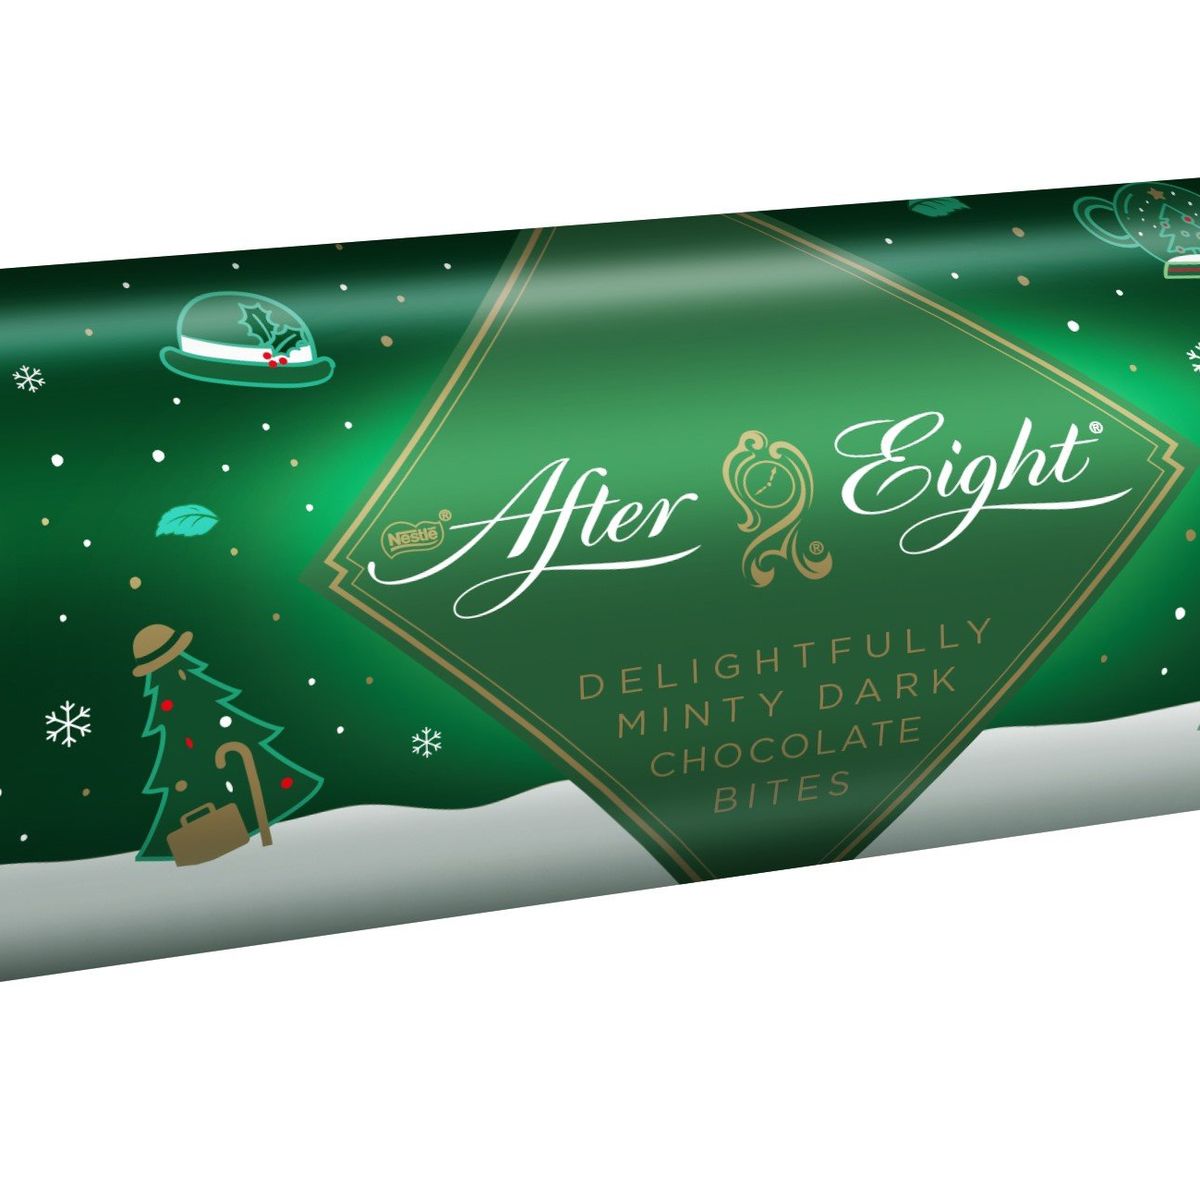 After Eight launches mint dark chocolate bites for Christmas